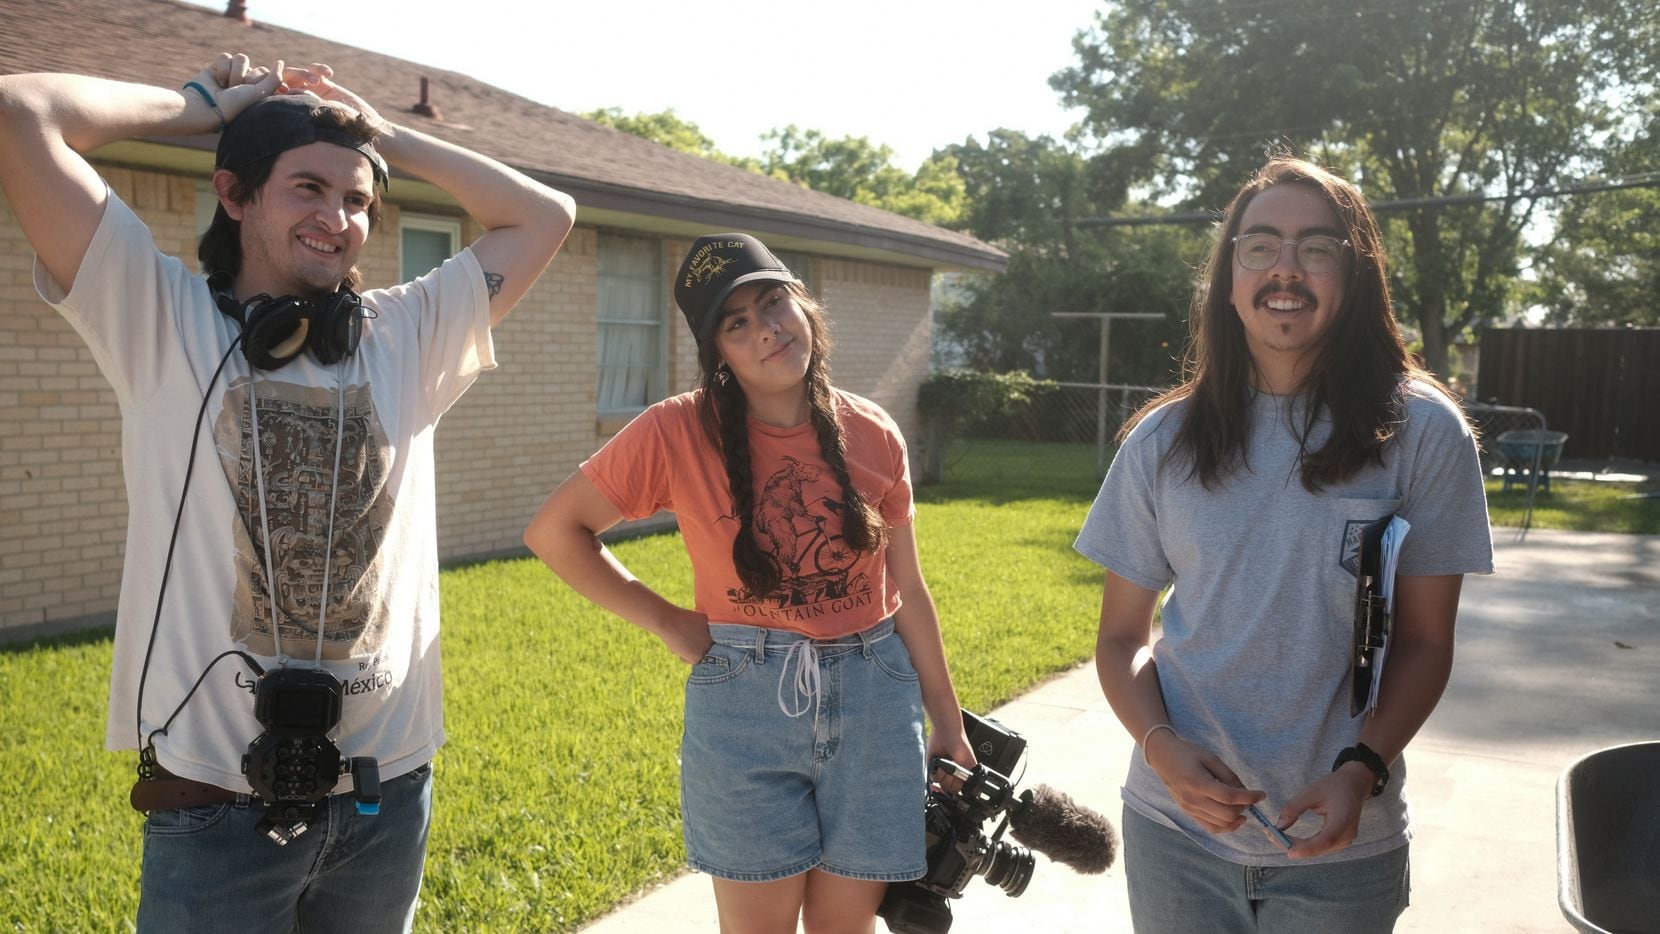 From left to right: David Velez, Emily Sánchez and Brandon Rivera are the Tejano trio behind...